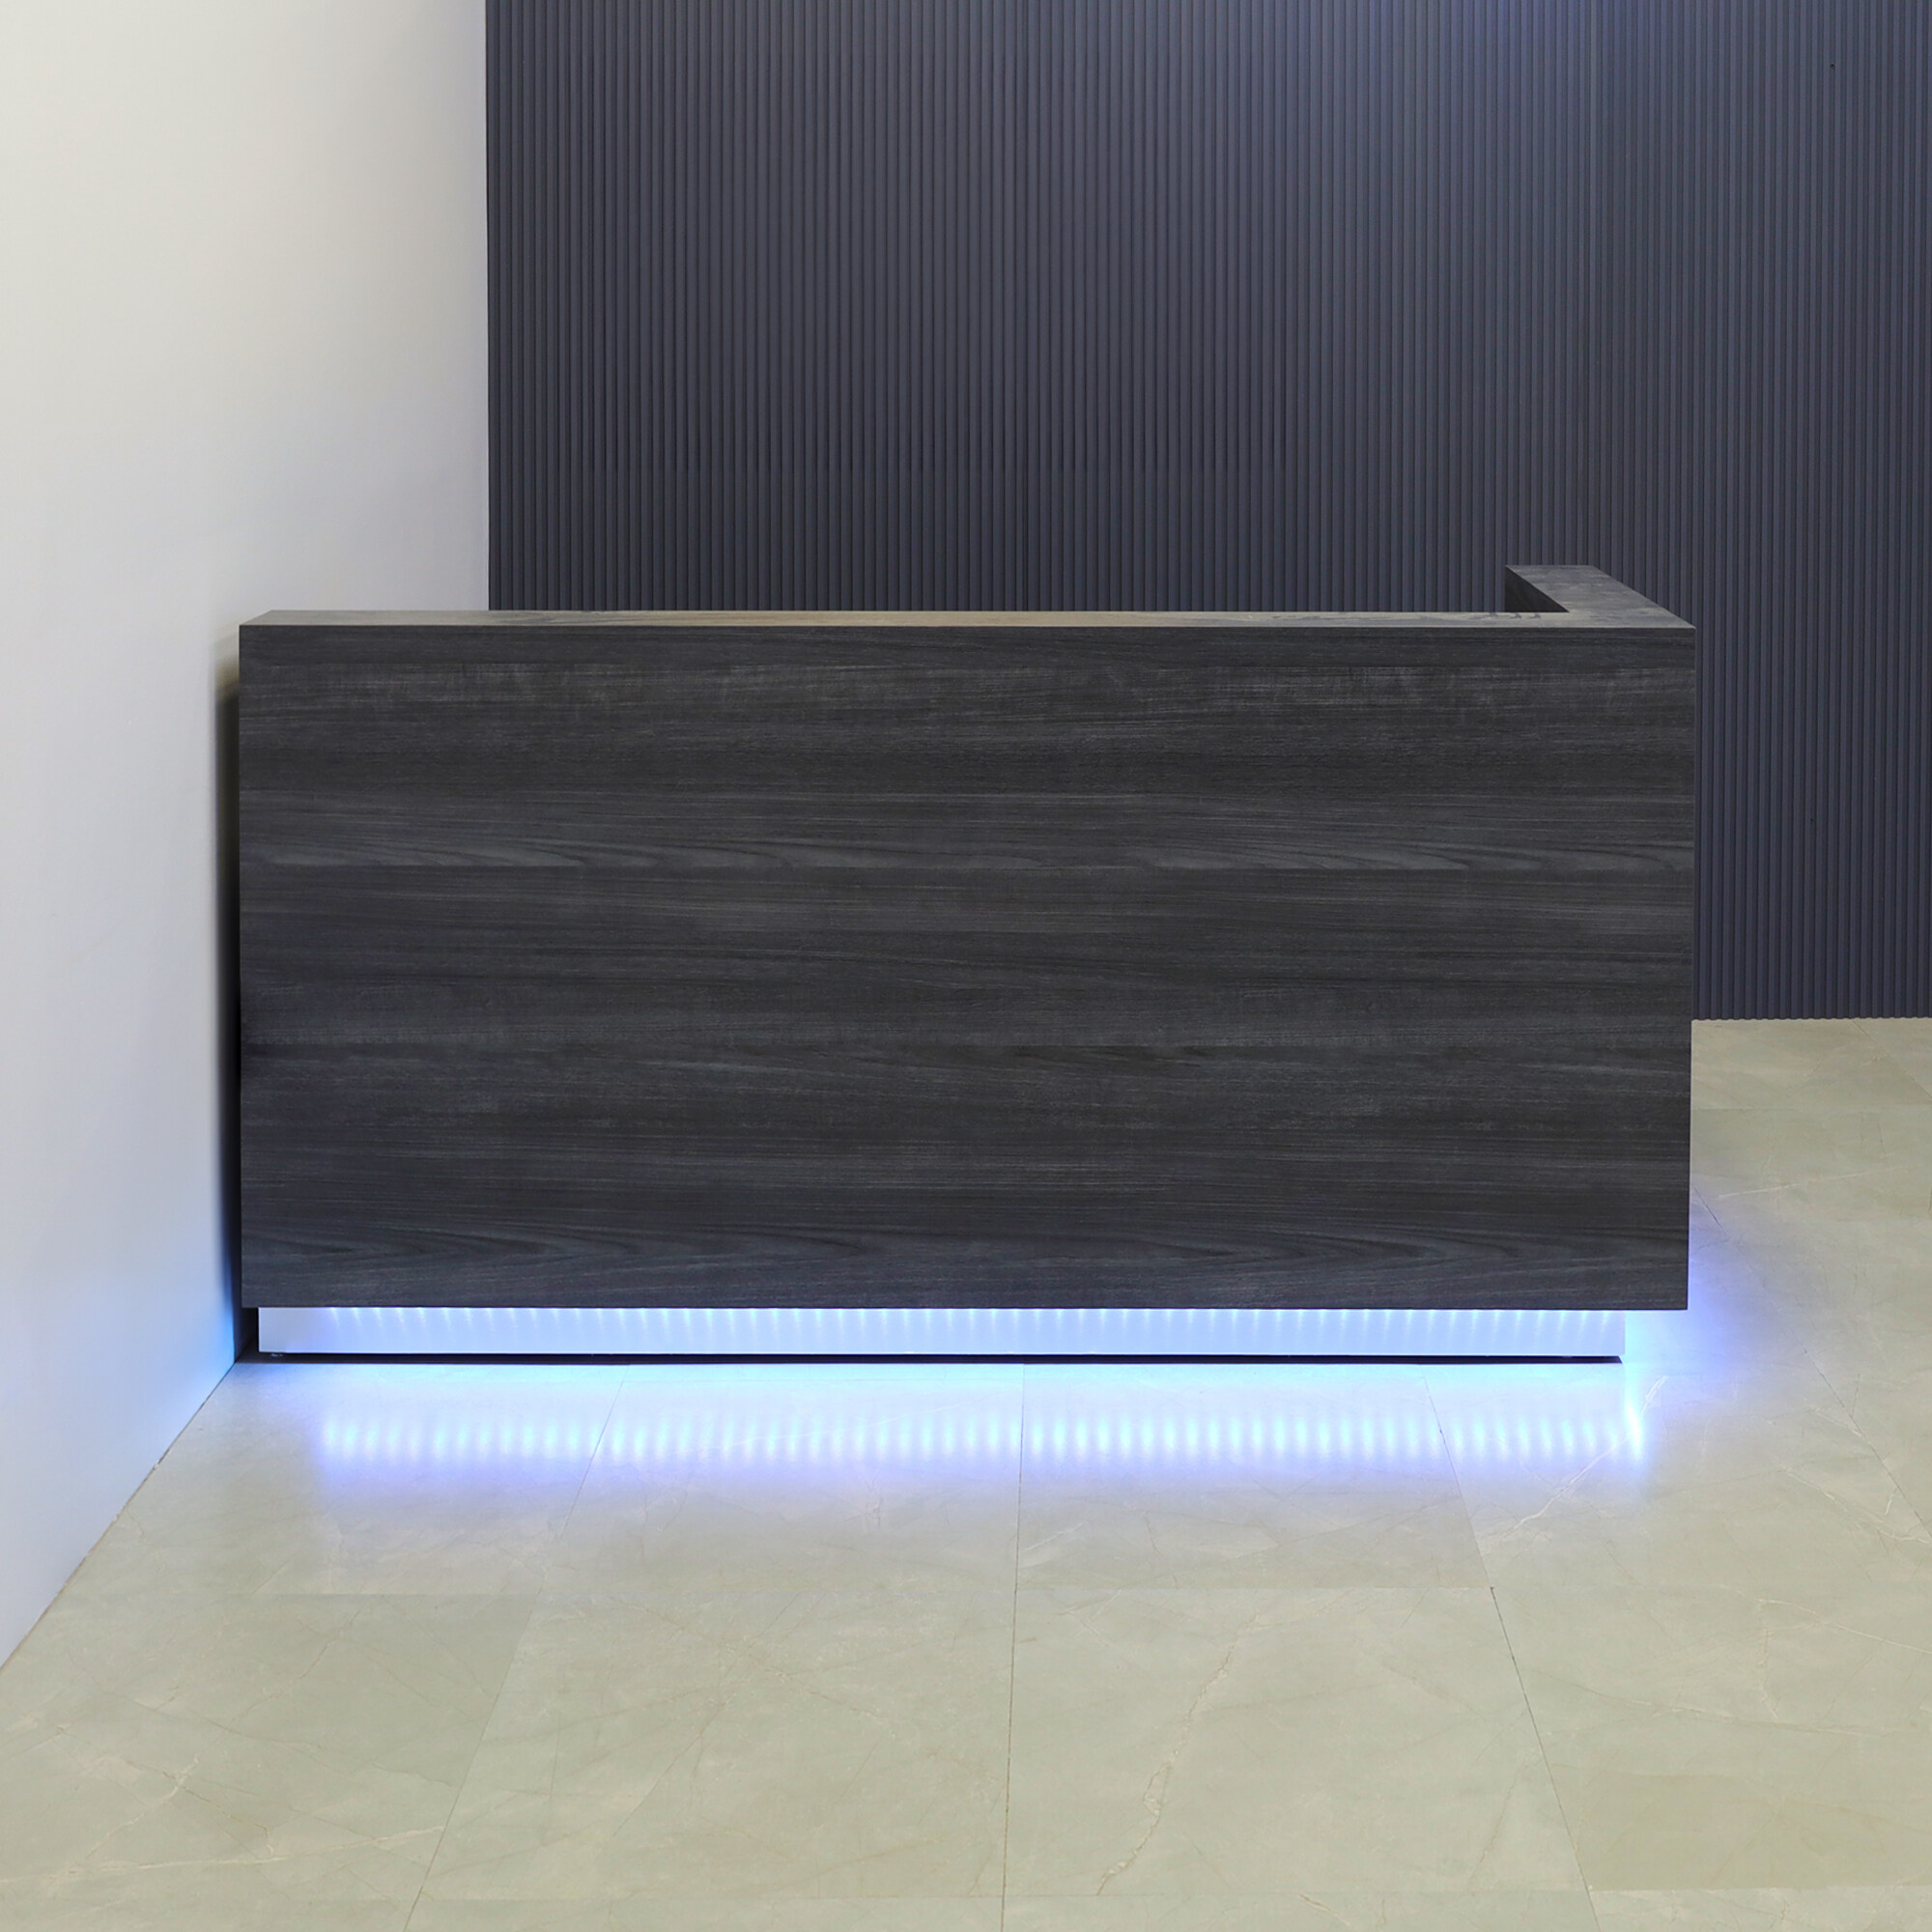 84-inch Dallas L-Shape Custom Reception Desk, right side l-panel when facing front in storm teakwood matte laminate main desk and brushed aluminum toe-kick, with multi-colored LED, shown here.